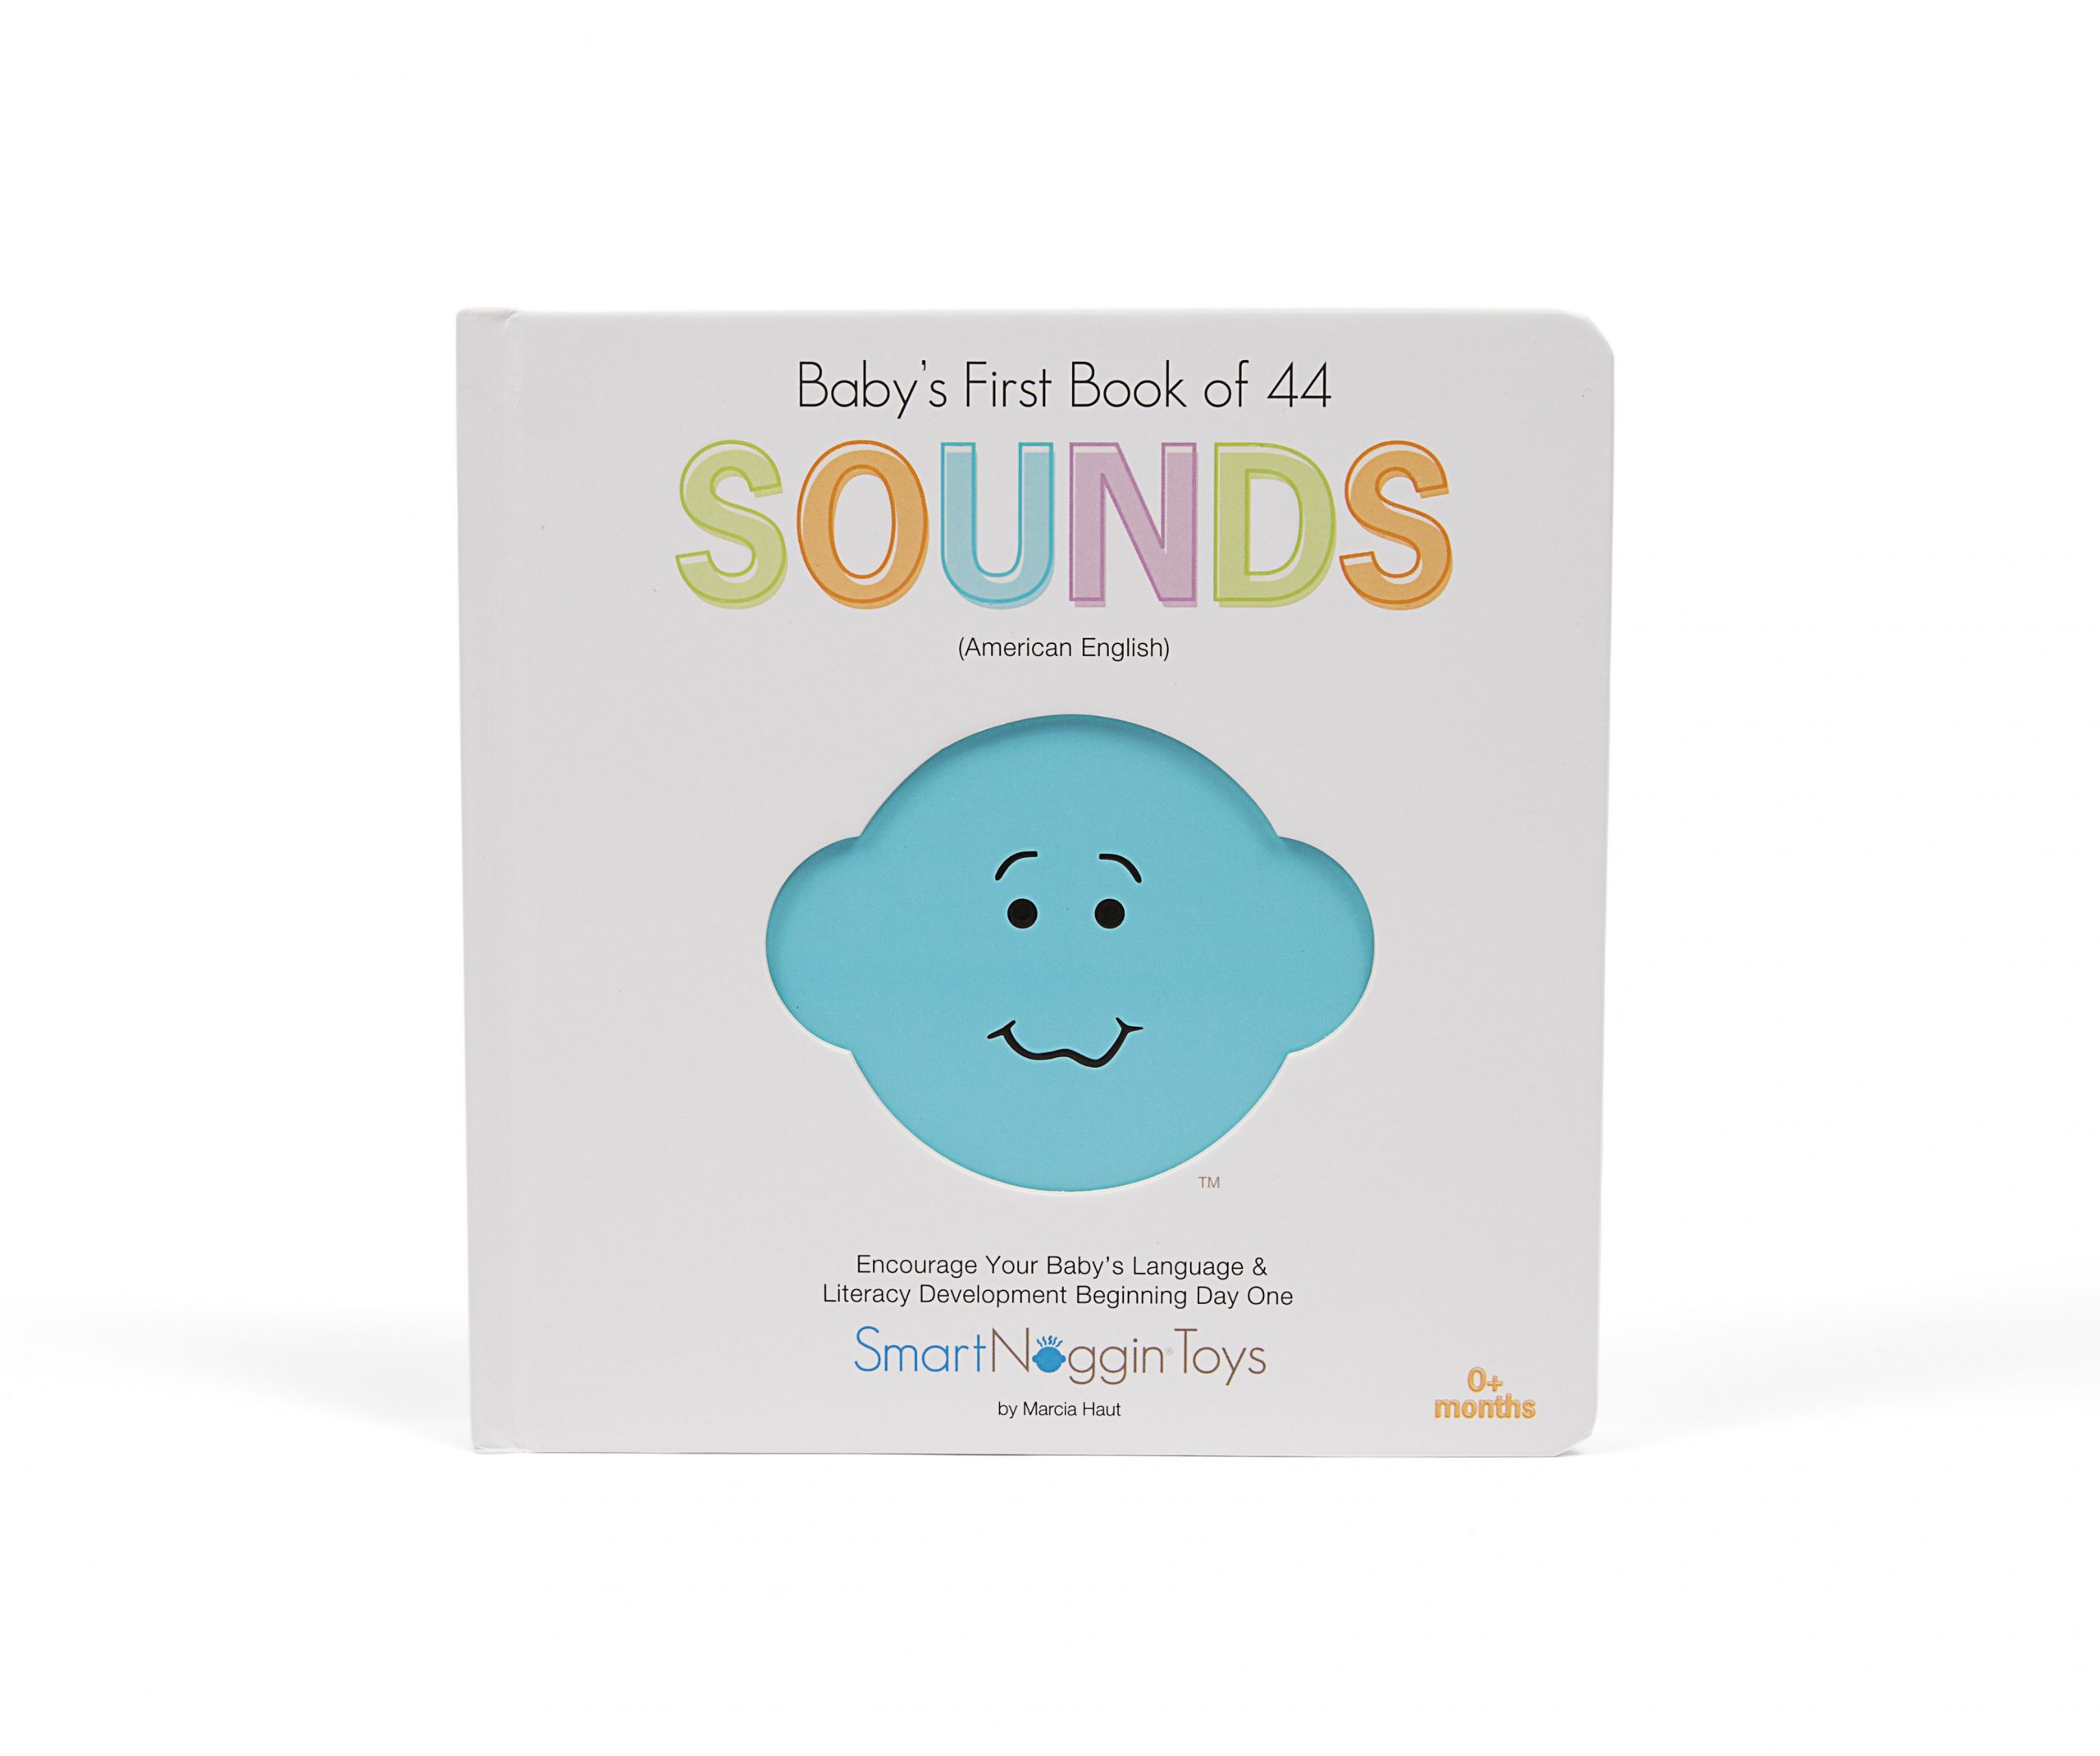 Baby’s First Book of 44 SOUNDS